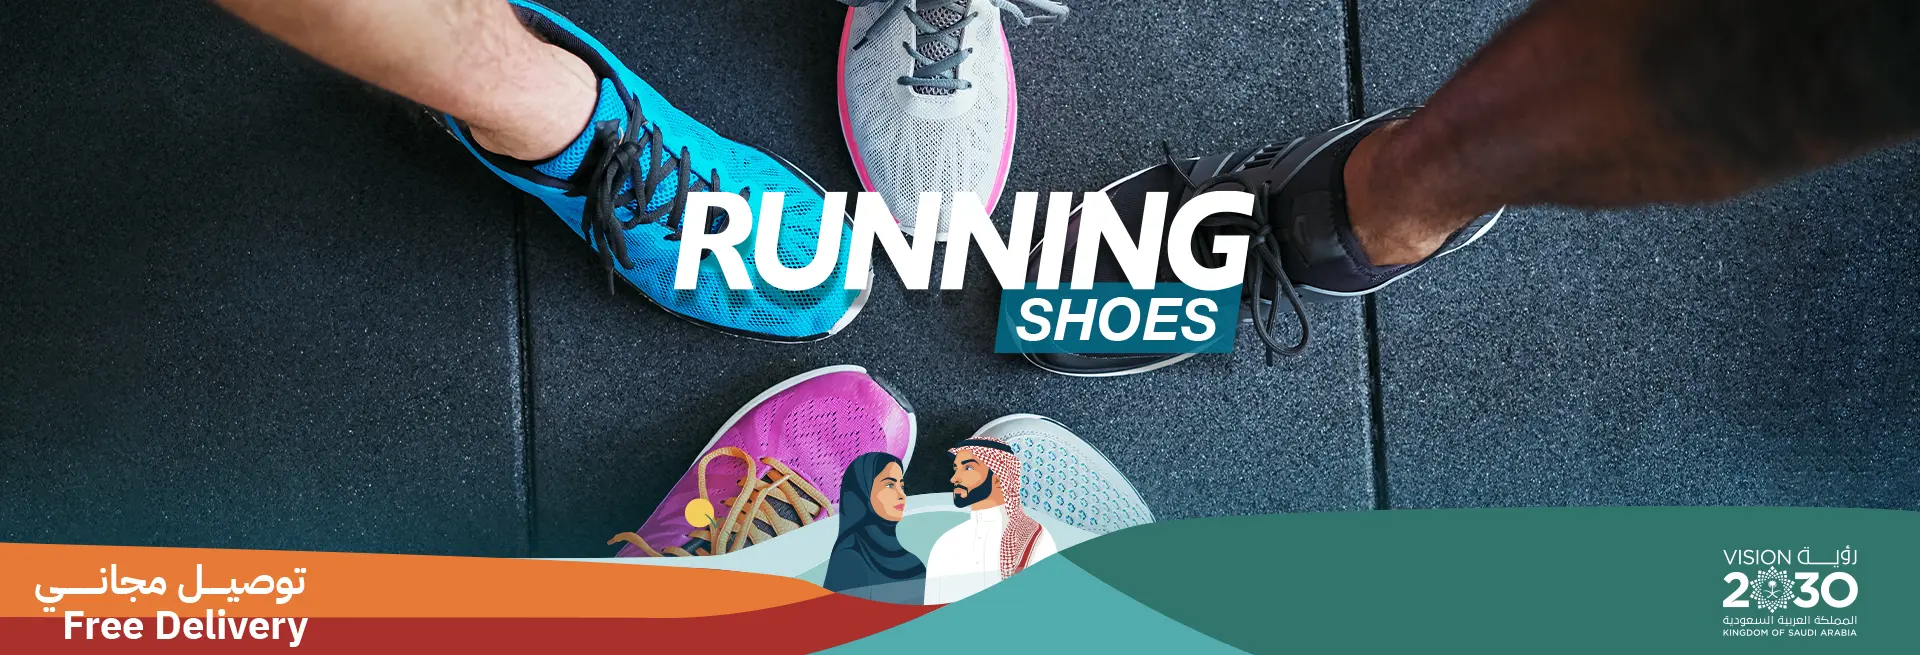 RUNNING SHOES - sports